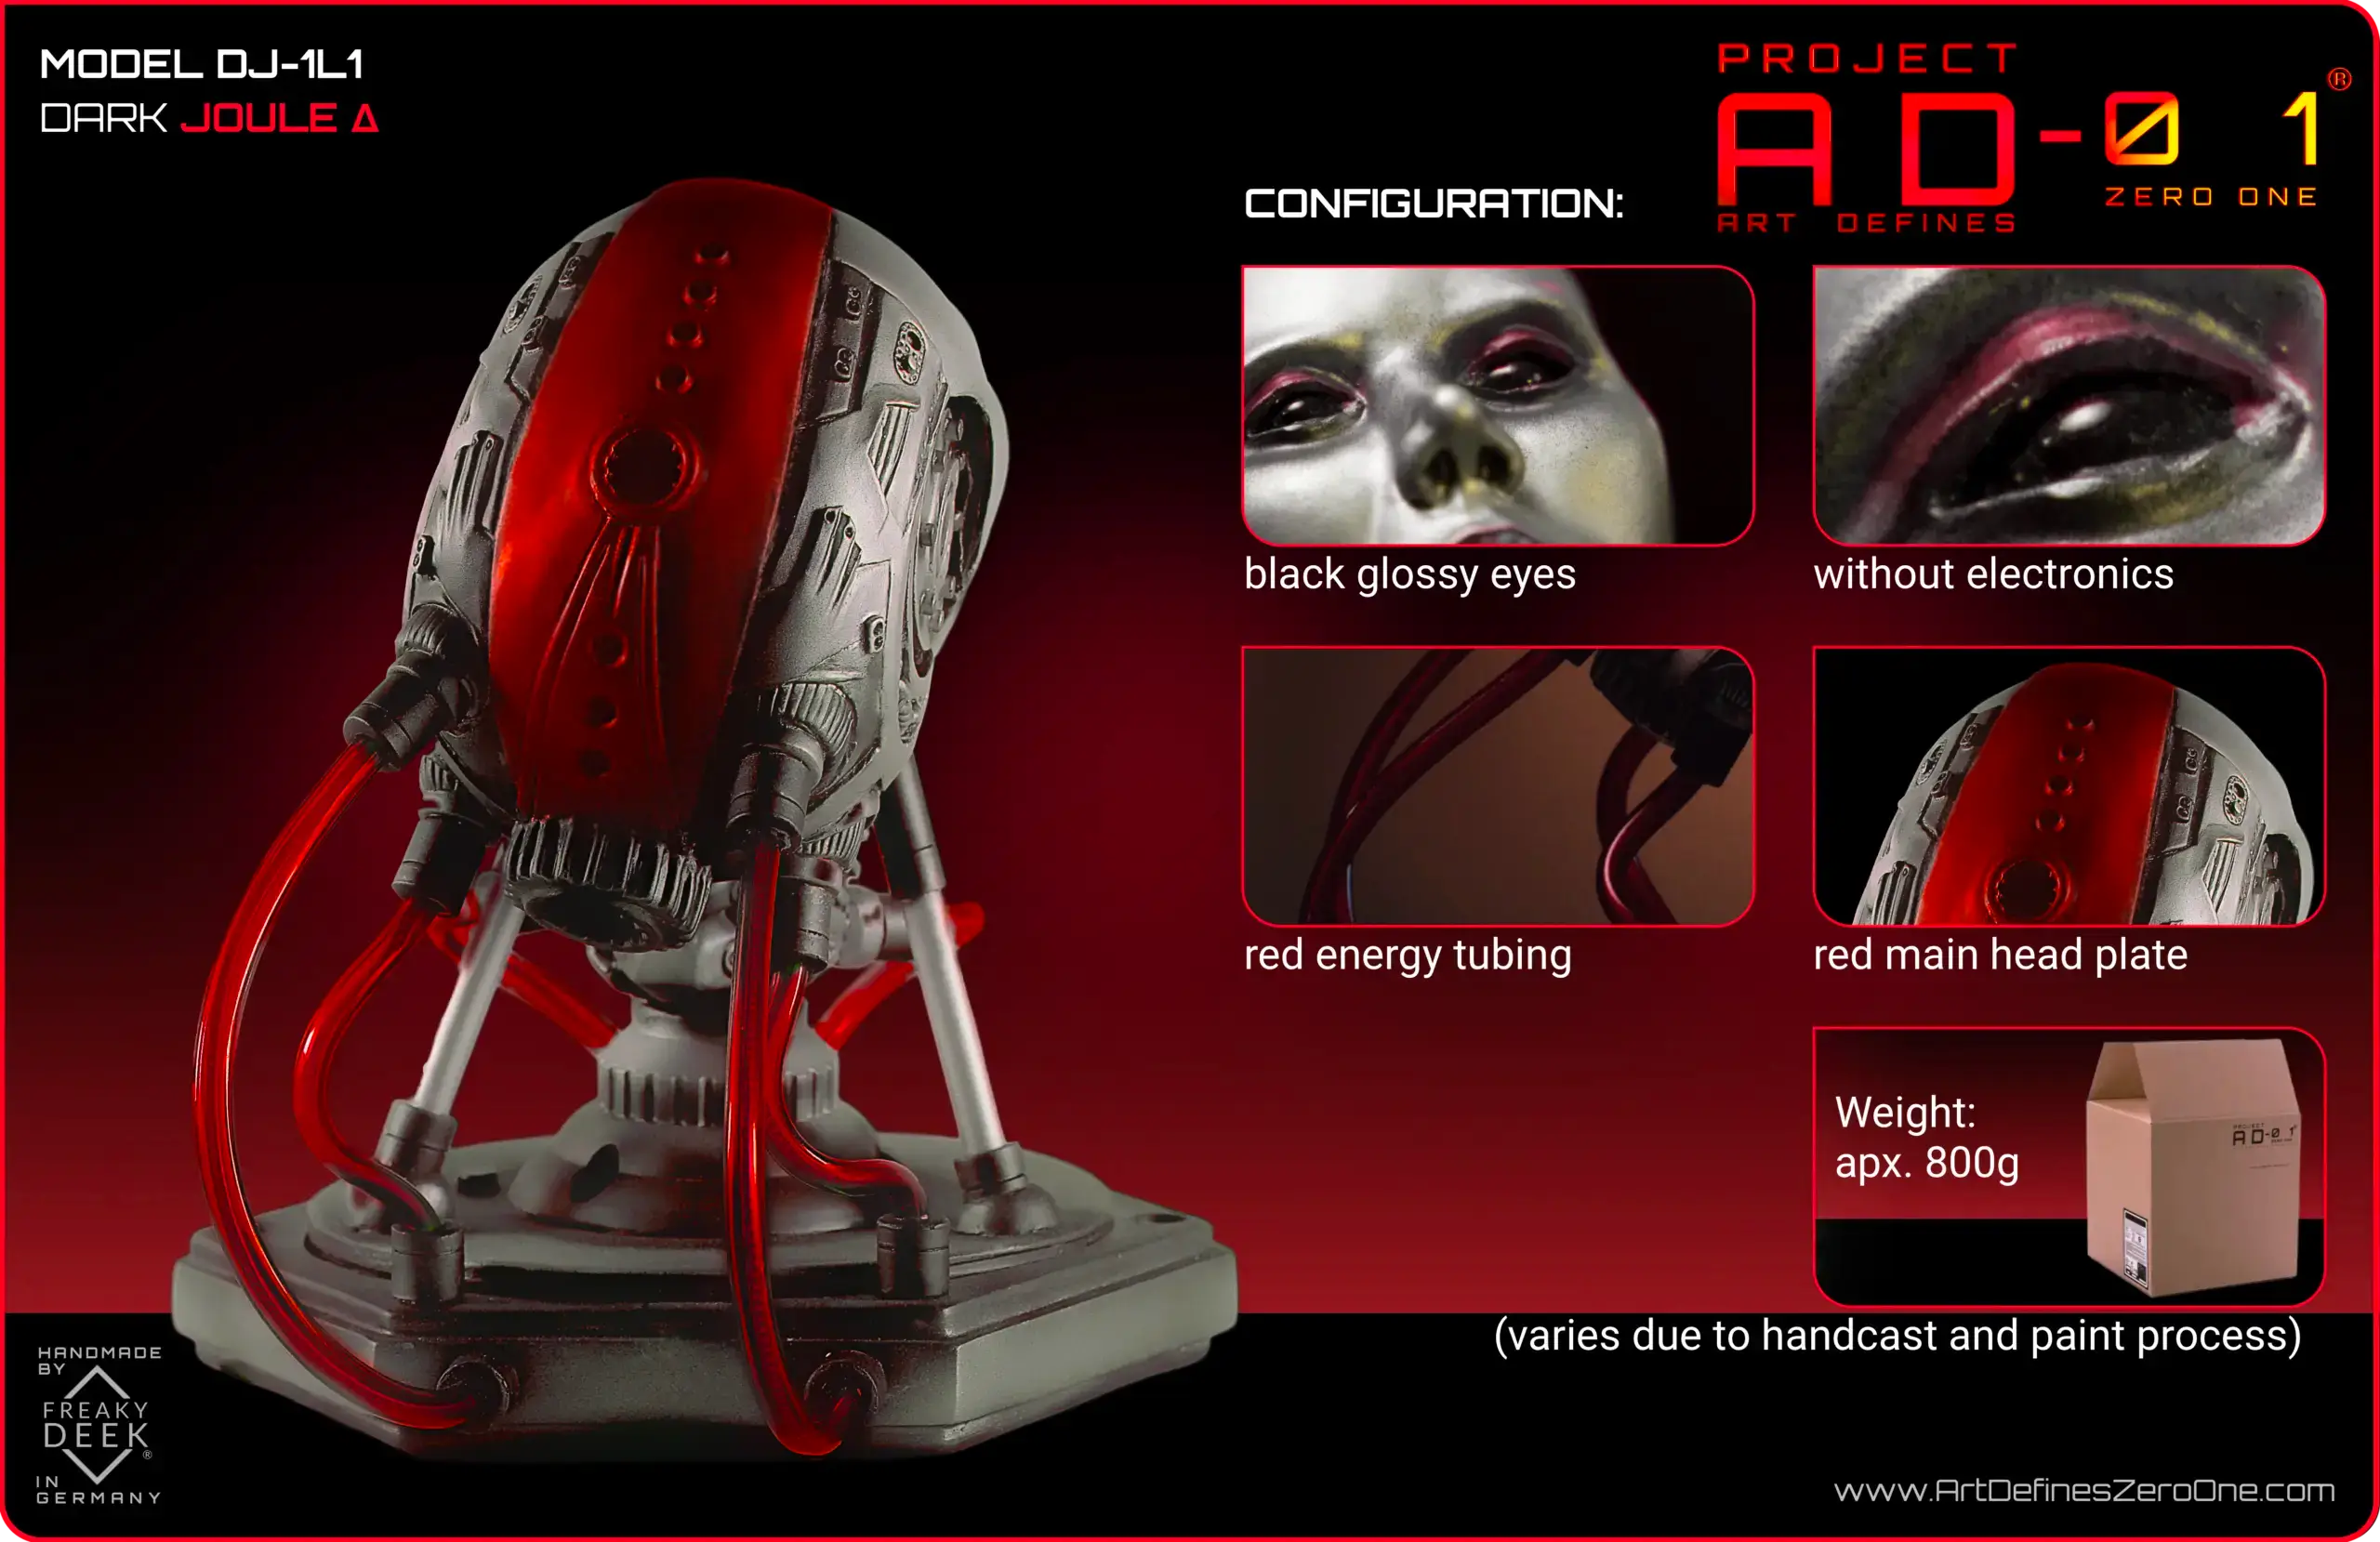 Project AD-01 DJ-1L1 handmade android sculpture Joule with red energy tubes, product configuration: black glossy eyes, without electronics, red metallic design, weight: apx. 800g